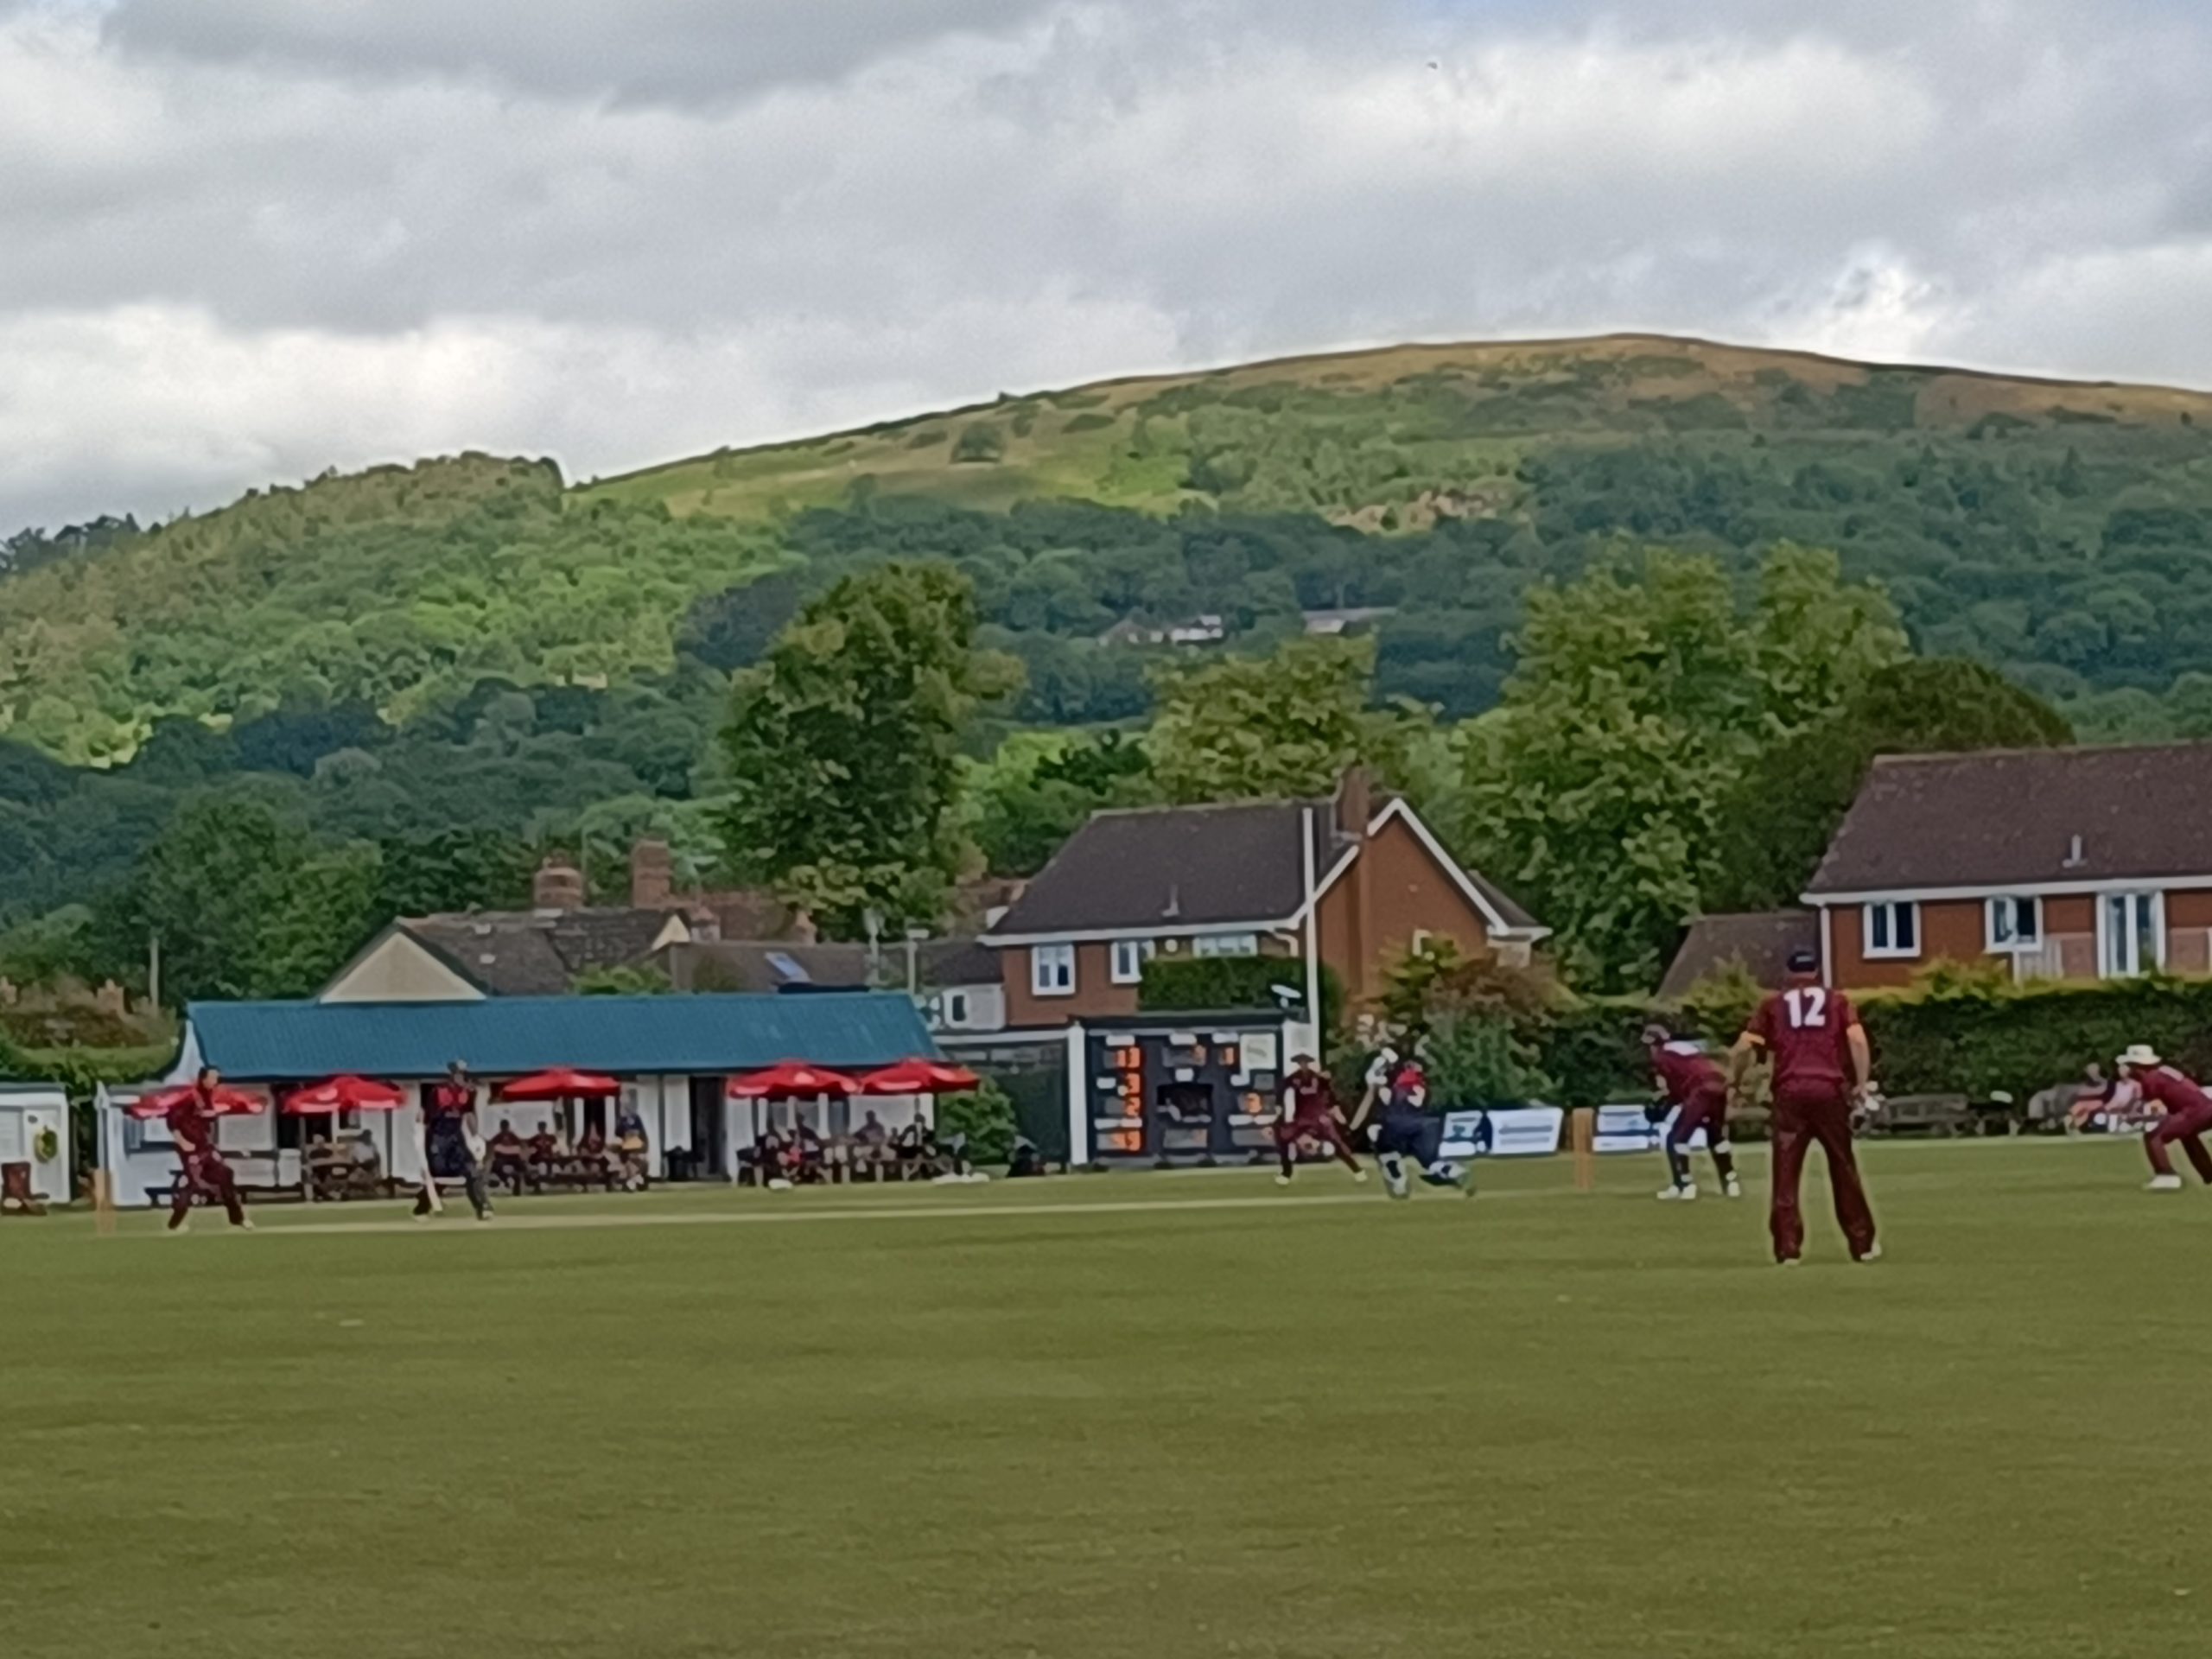 CRICKET | Herefordshire fell agonisingly short of a place in the knock-out stages of the NCCA 50-over competition when they were beaten by just three runs by Suffolk at Colwall